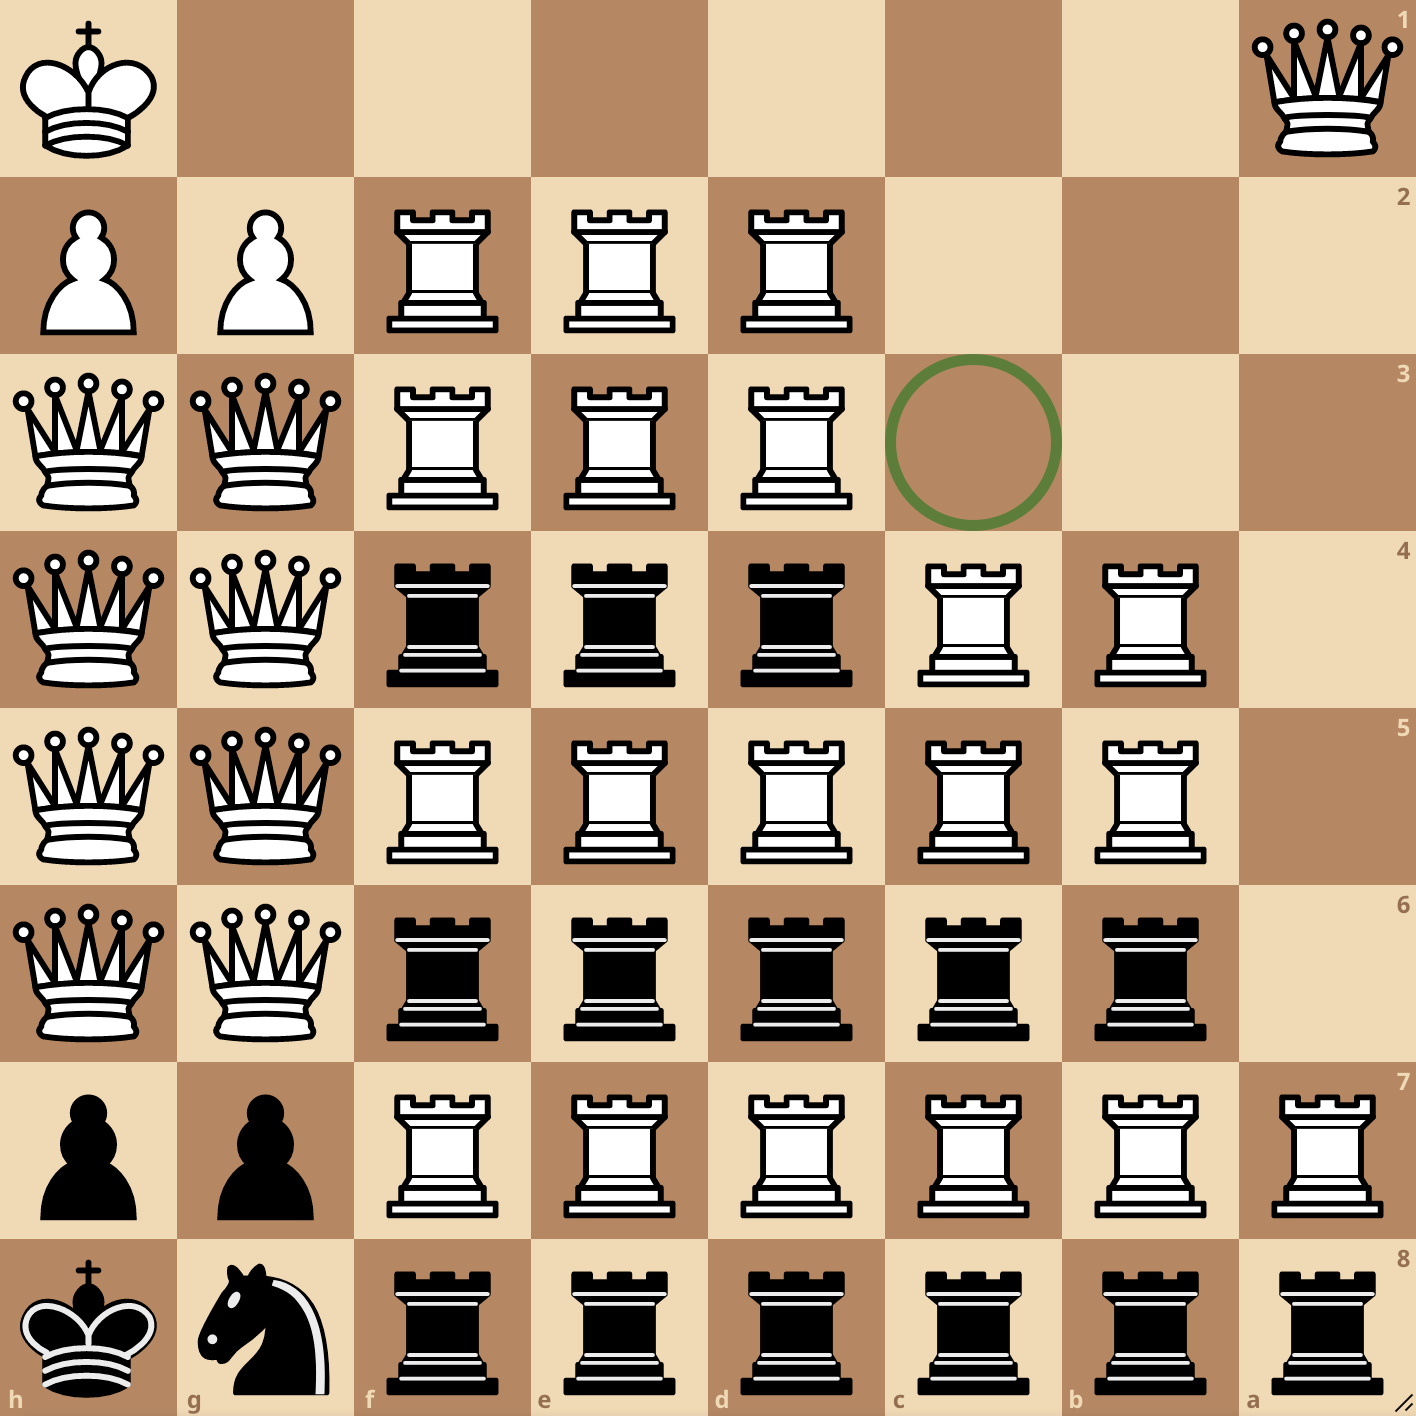 A chess board with a1 at the top right. A green circle marks c3. The board's FEN is below.